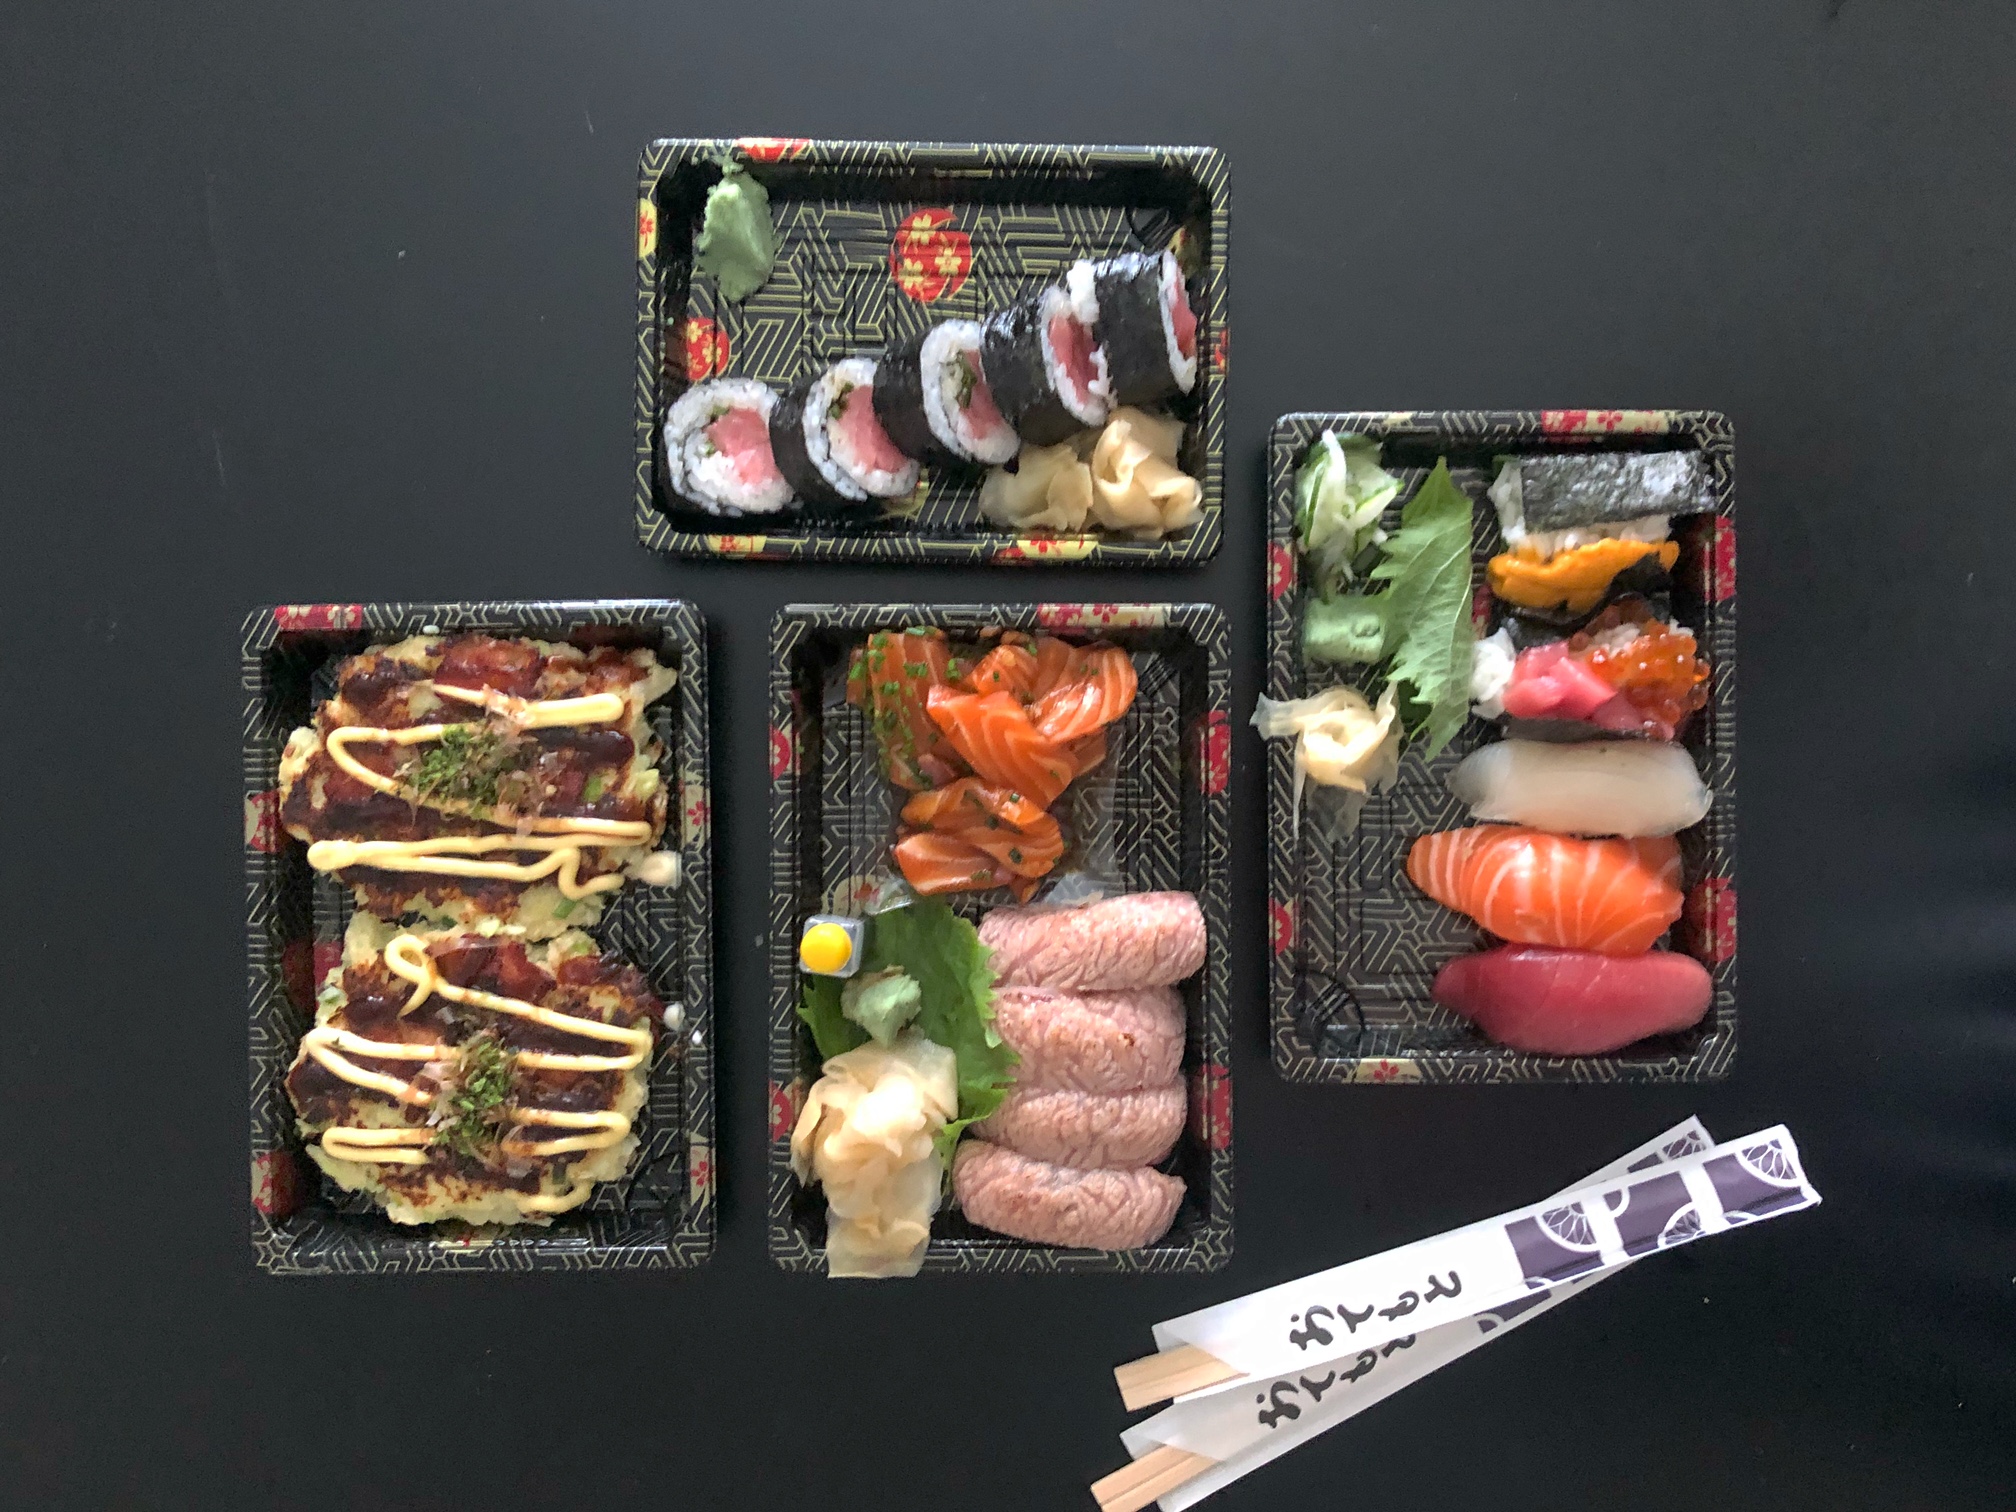 An overhead photo of takeout rectangular dishes on a black table with two chopsticks packs. There are okonomiyaki, five piece nigiri, seared toro, marinated salmon, and a tuna sushi roll. Photo by Alyssa Buckley.